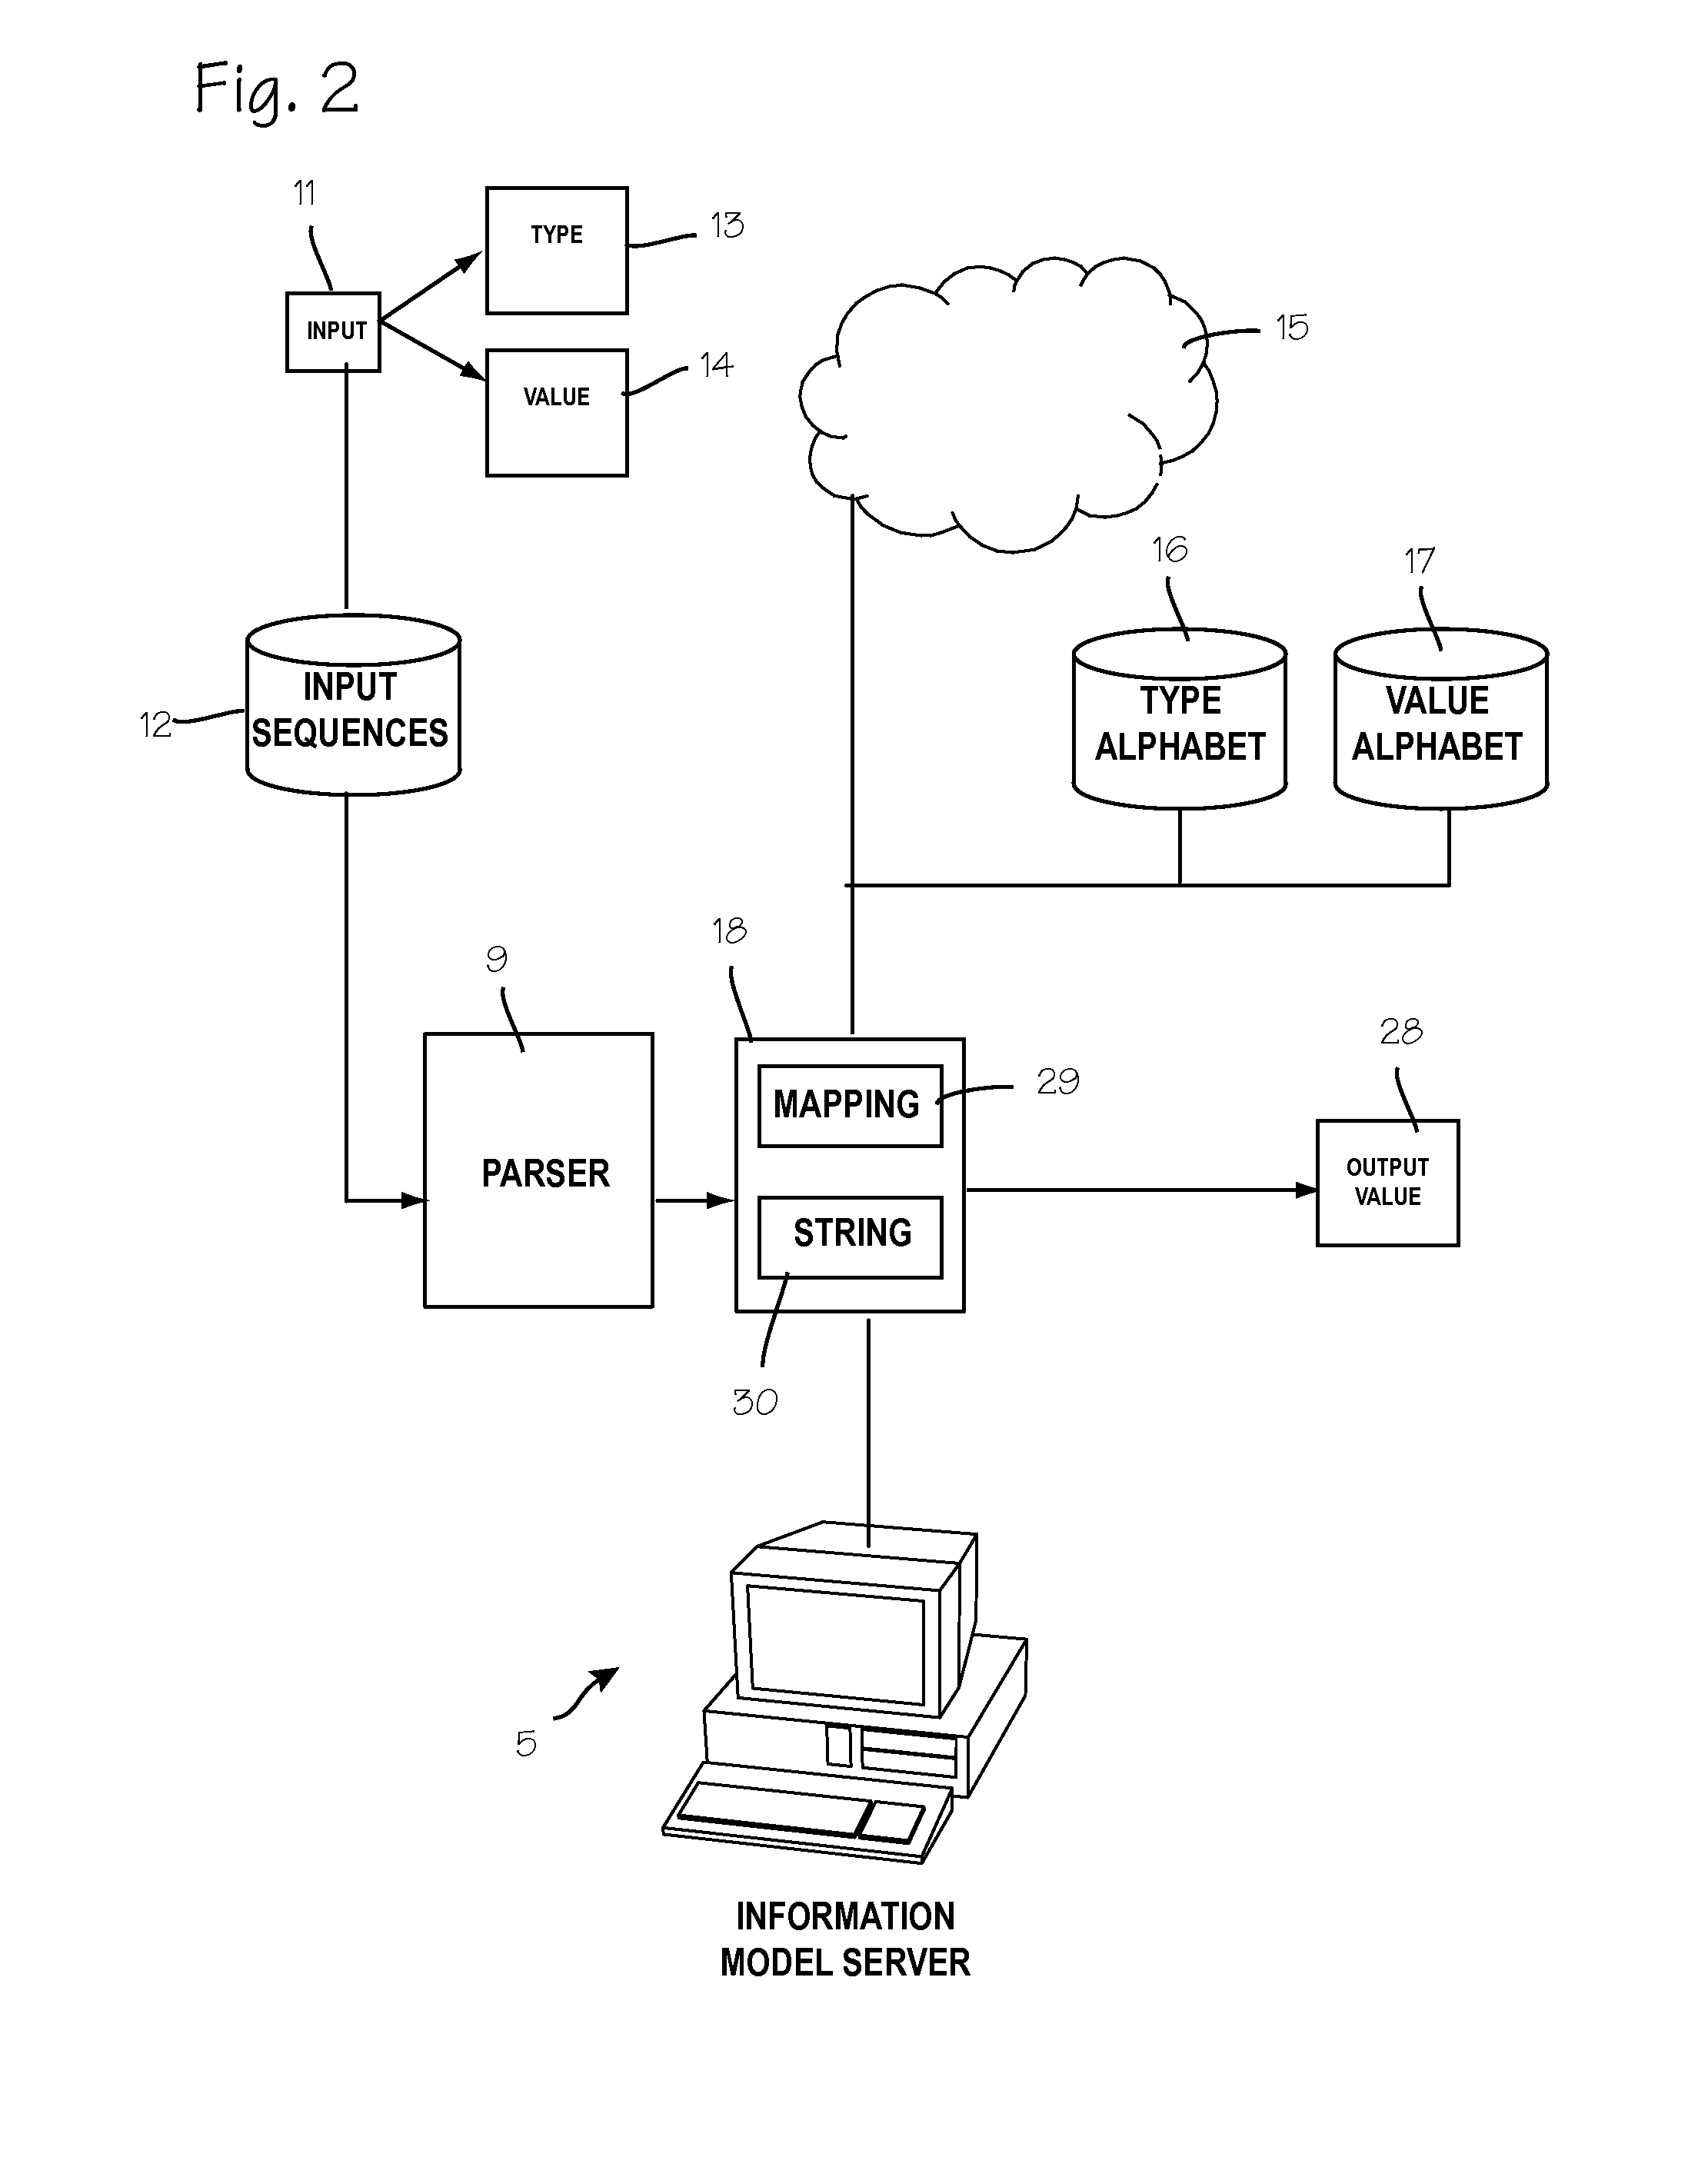 System and Method for Generating and Promulgating Physician Order Entries